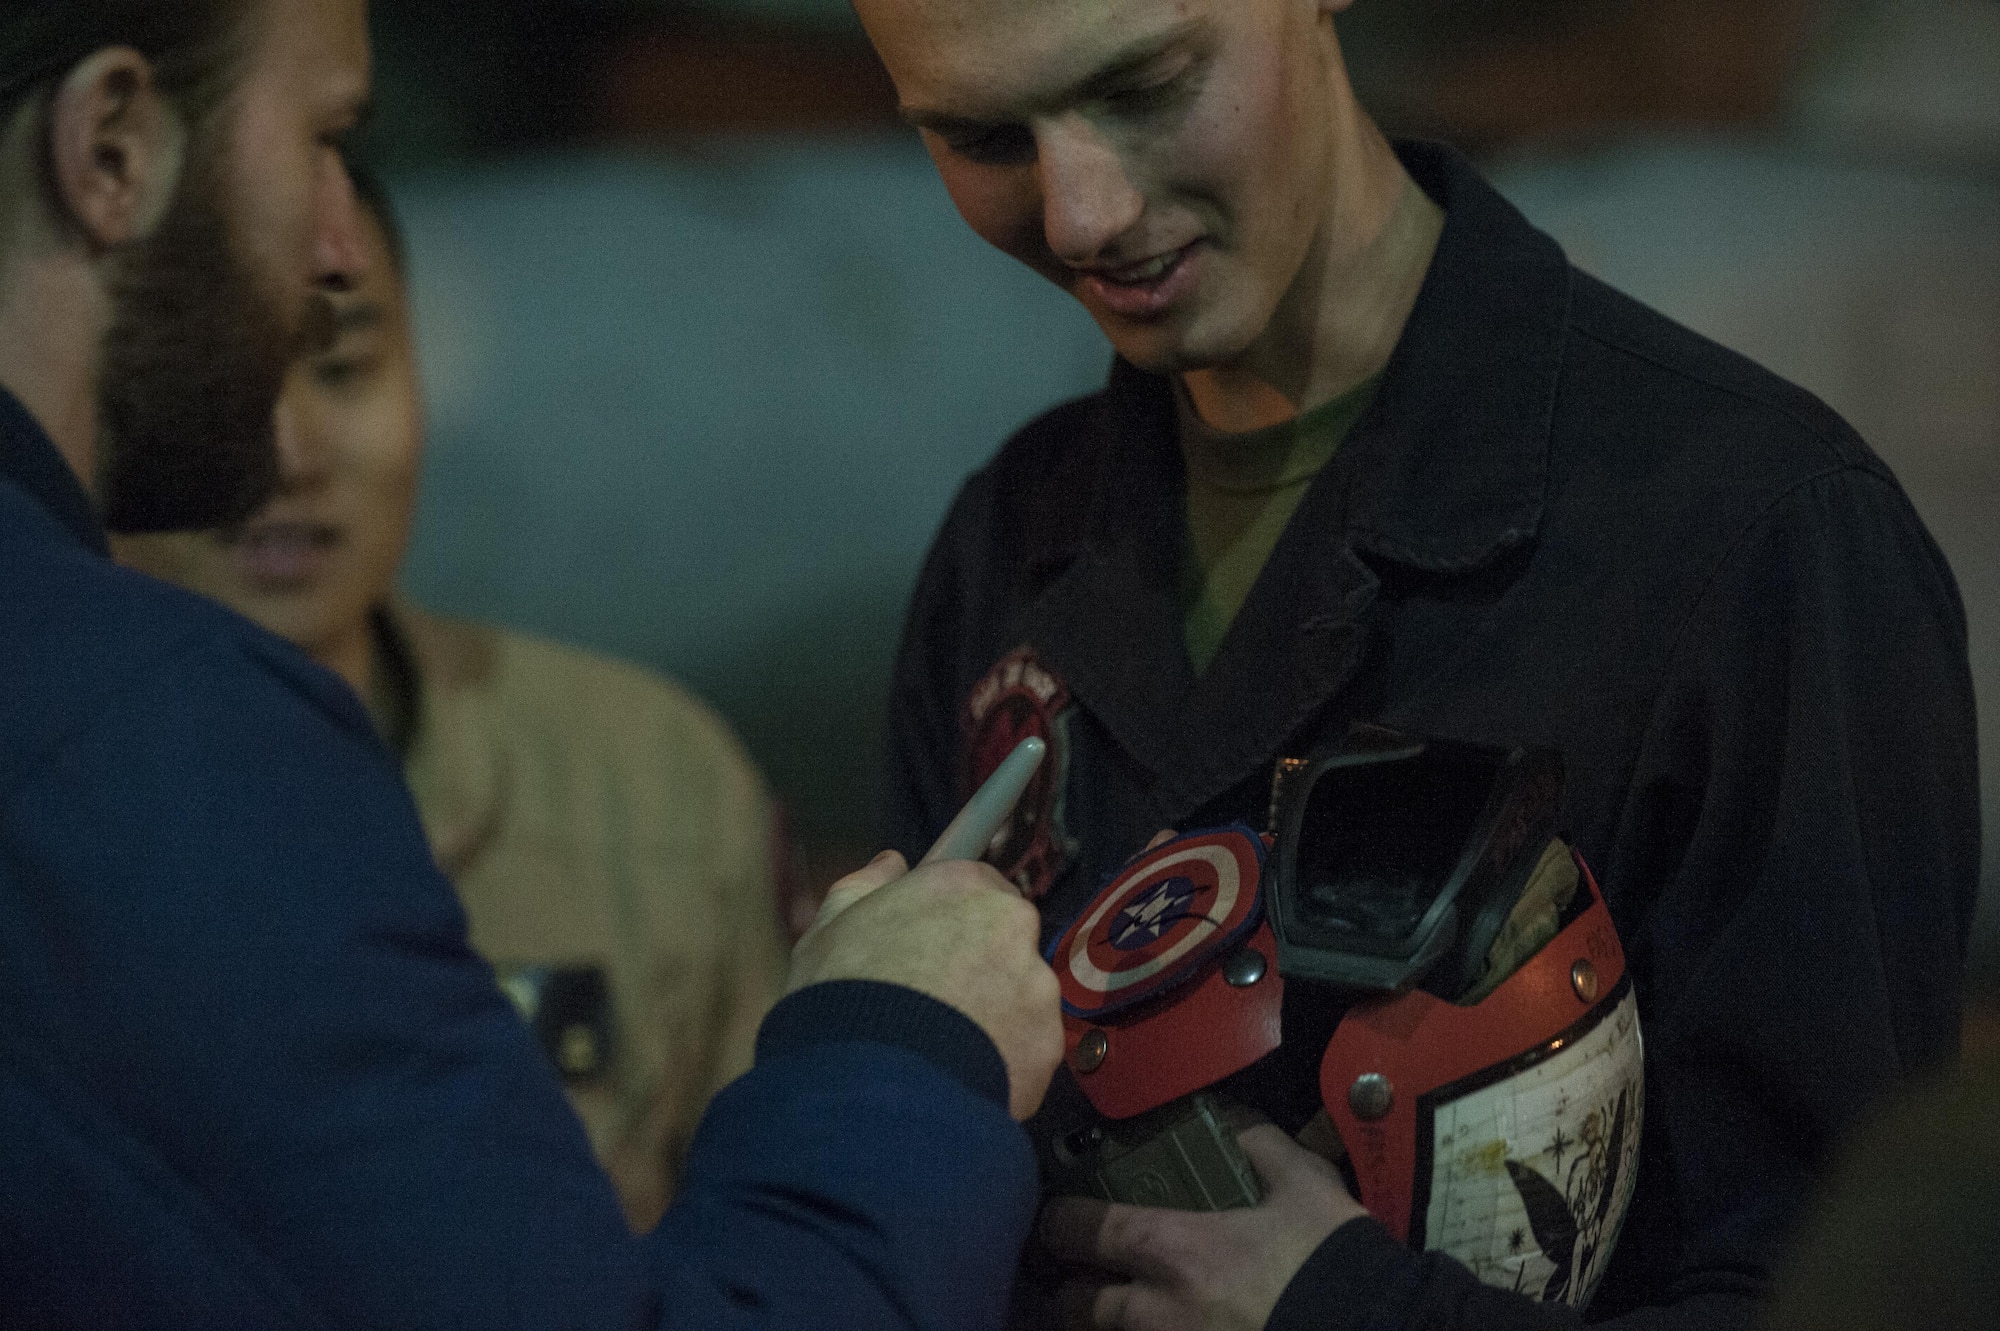 Actor Chris Evans signs a service member’s protective gear Dec. 5, 2016, at Incirlik Air Base, Turkey. Evans was one of many USO entertainers to visit Incirlik as a part of the 2016 USO Holiday Visit. The visit also included actress Scarlet Johansson, 4-time Olympic medalist Maya DiRado, entertainer Jim Karol, country music star Craig Campbell and NBA legend Ray Allen. (U.S. Air Force photo by Tech. Sgt. Joshua T. Jasper)